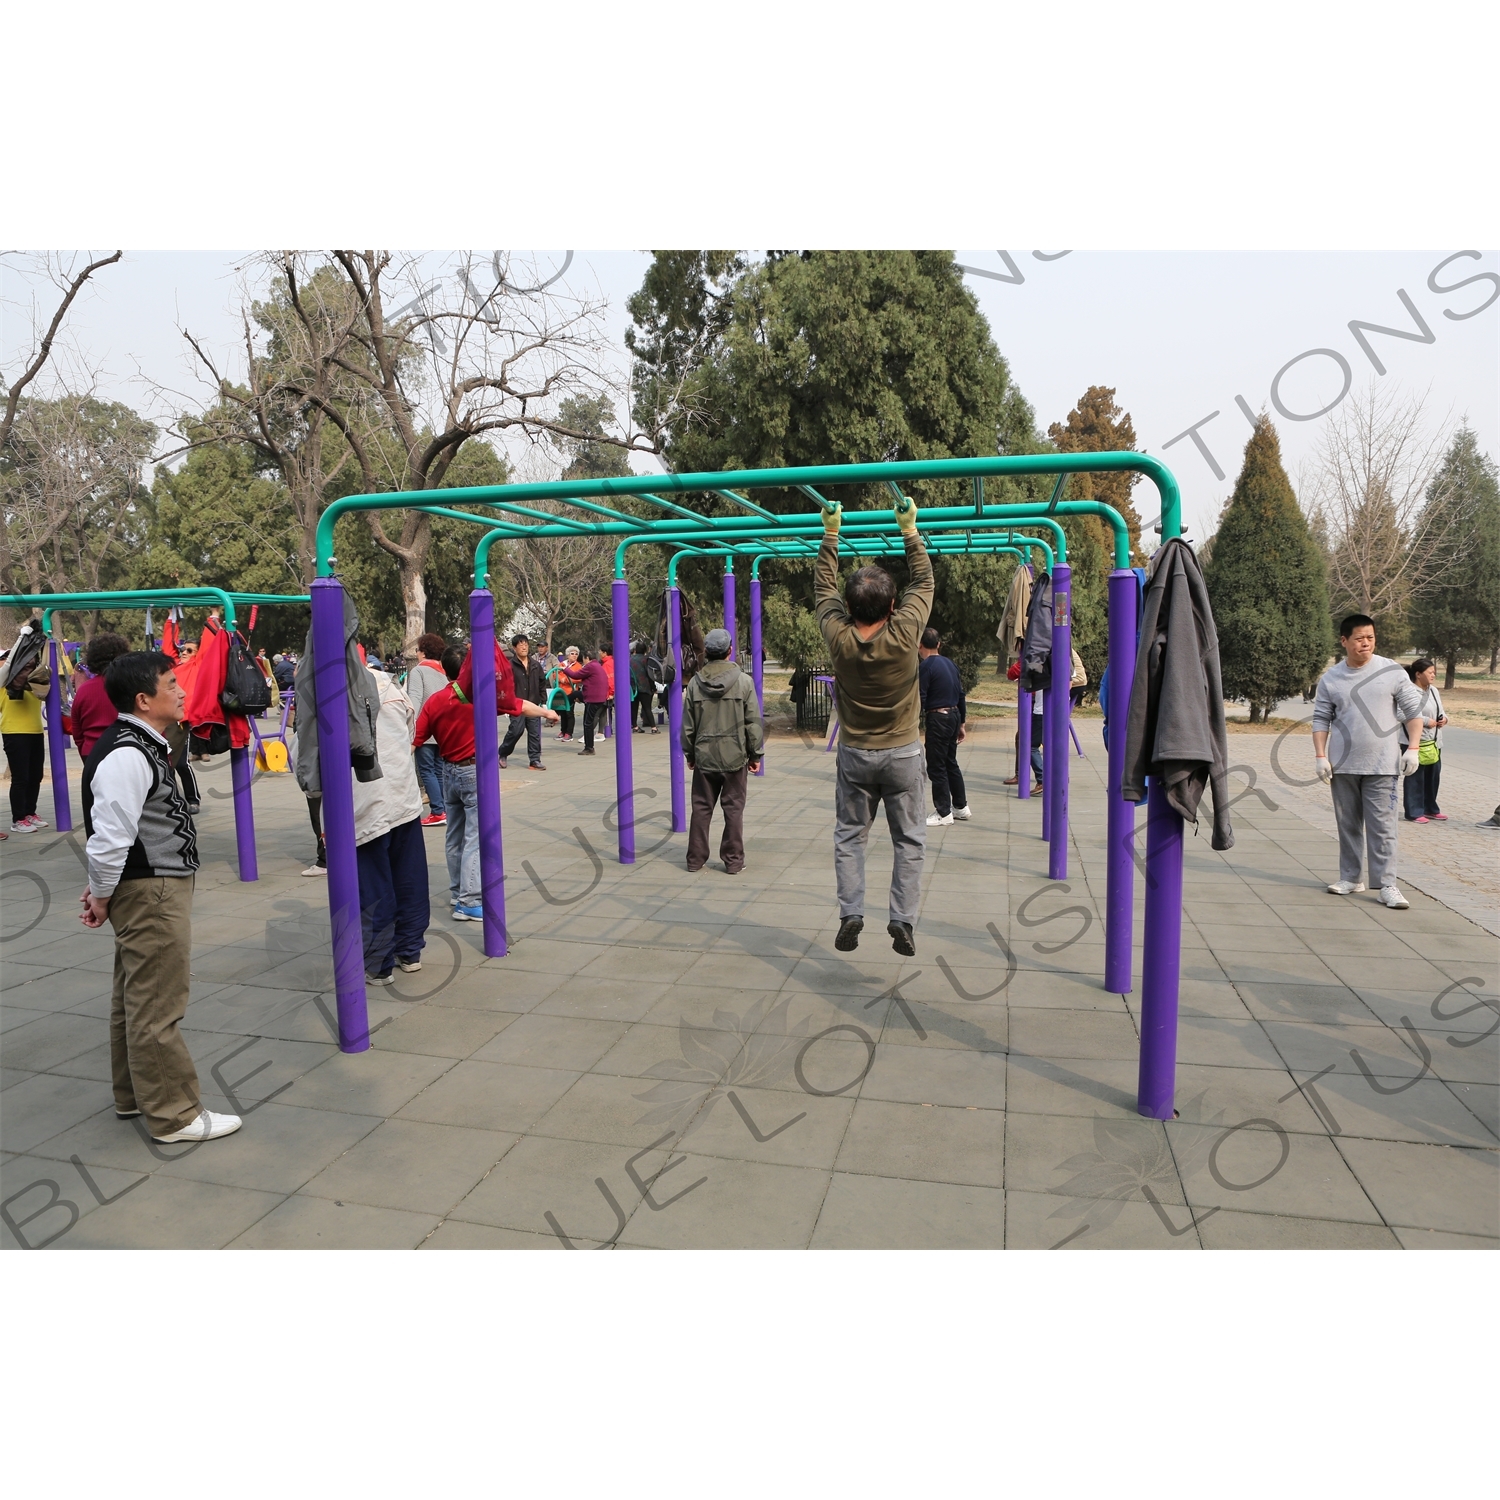 Communal Exercise Equipment near the North Gate of the Temple of Heaven (Tiantan) in Beijing